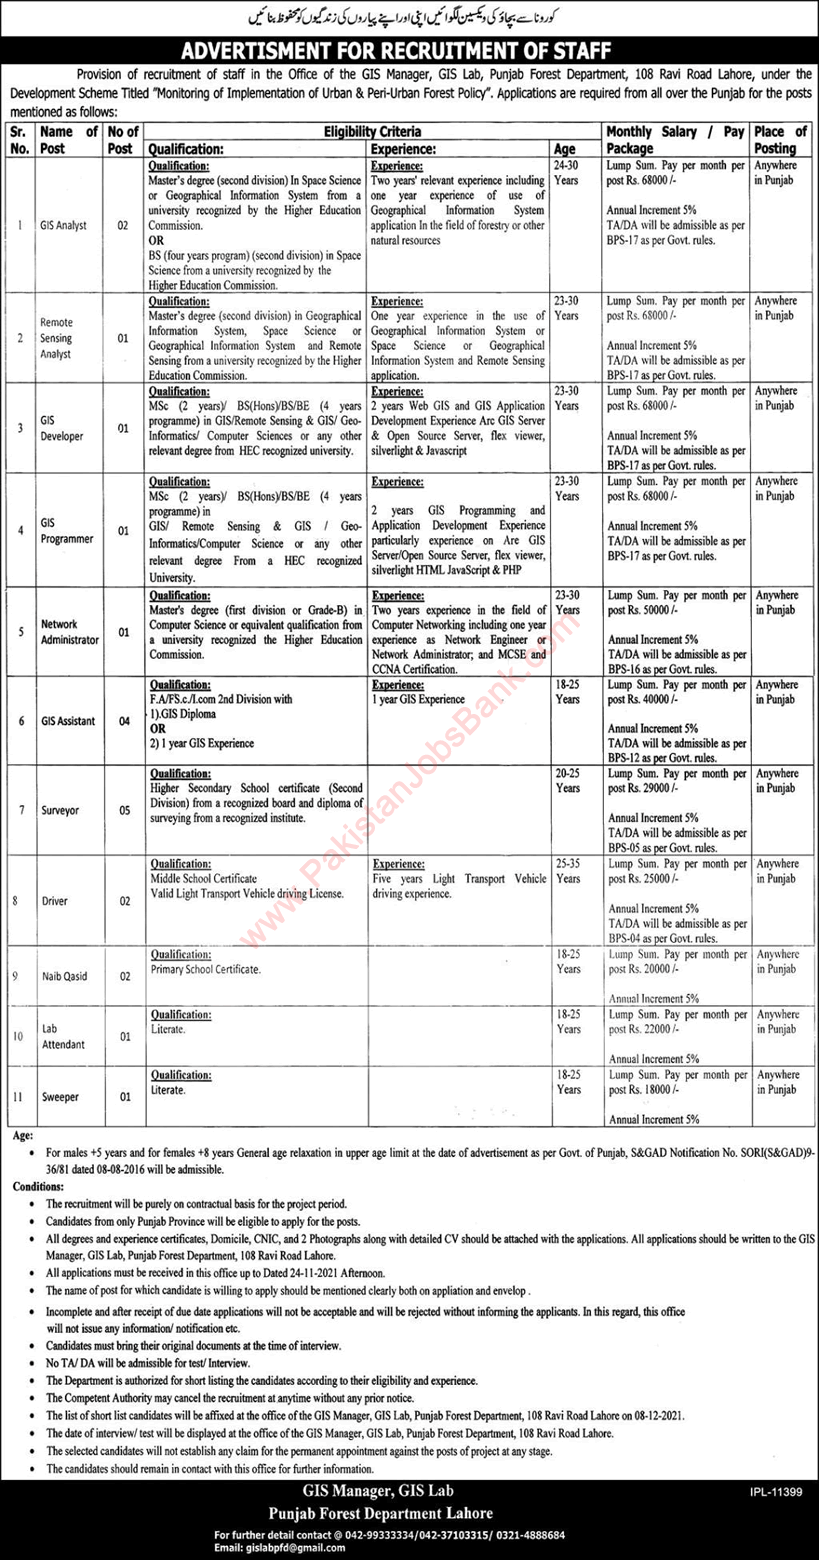 Forest Department Punjab Jobs November 2021 Surveyors, GIS Analysts, Assistants & Others Latest